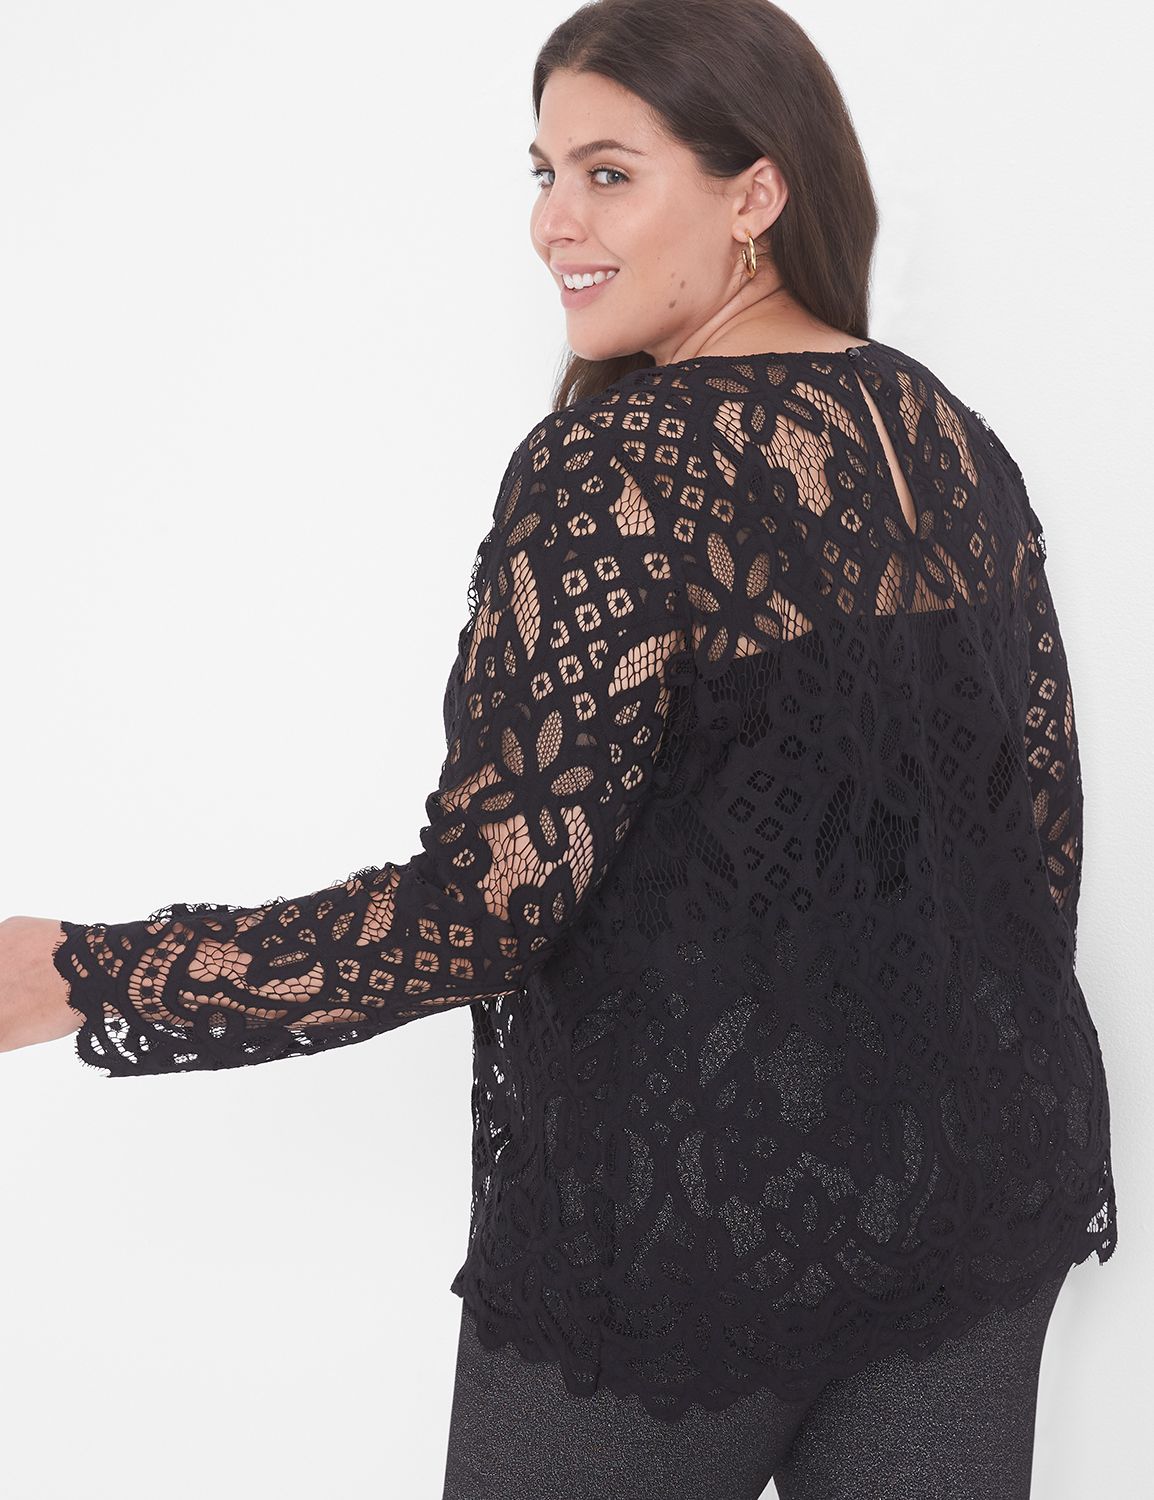 Classic Crew-Neck Sheer Lace Top